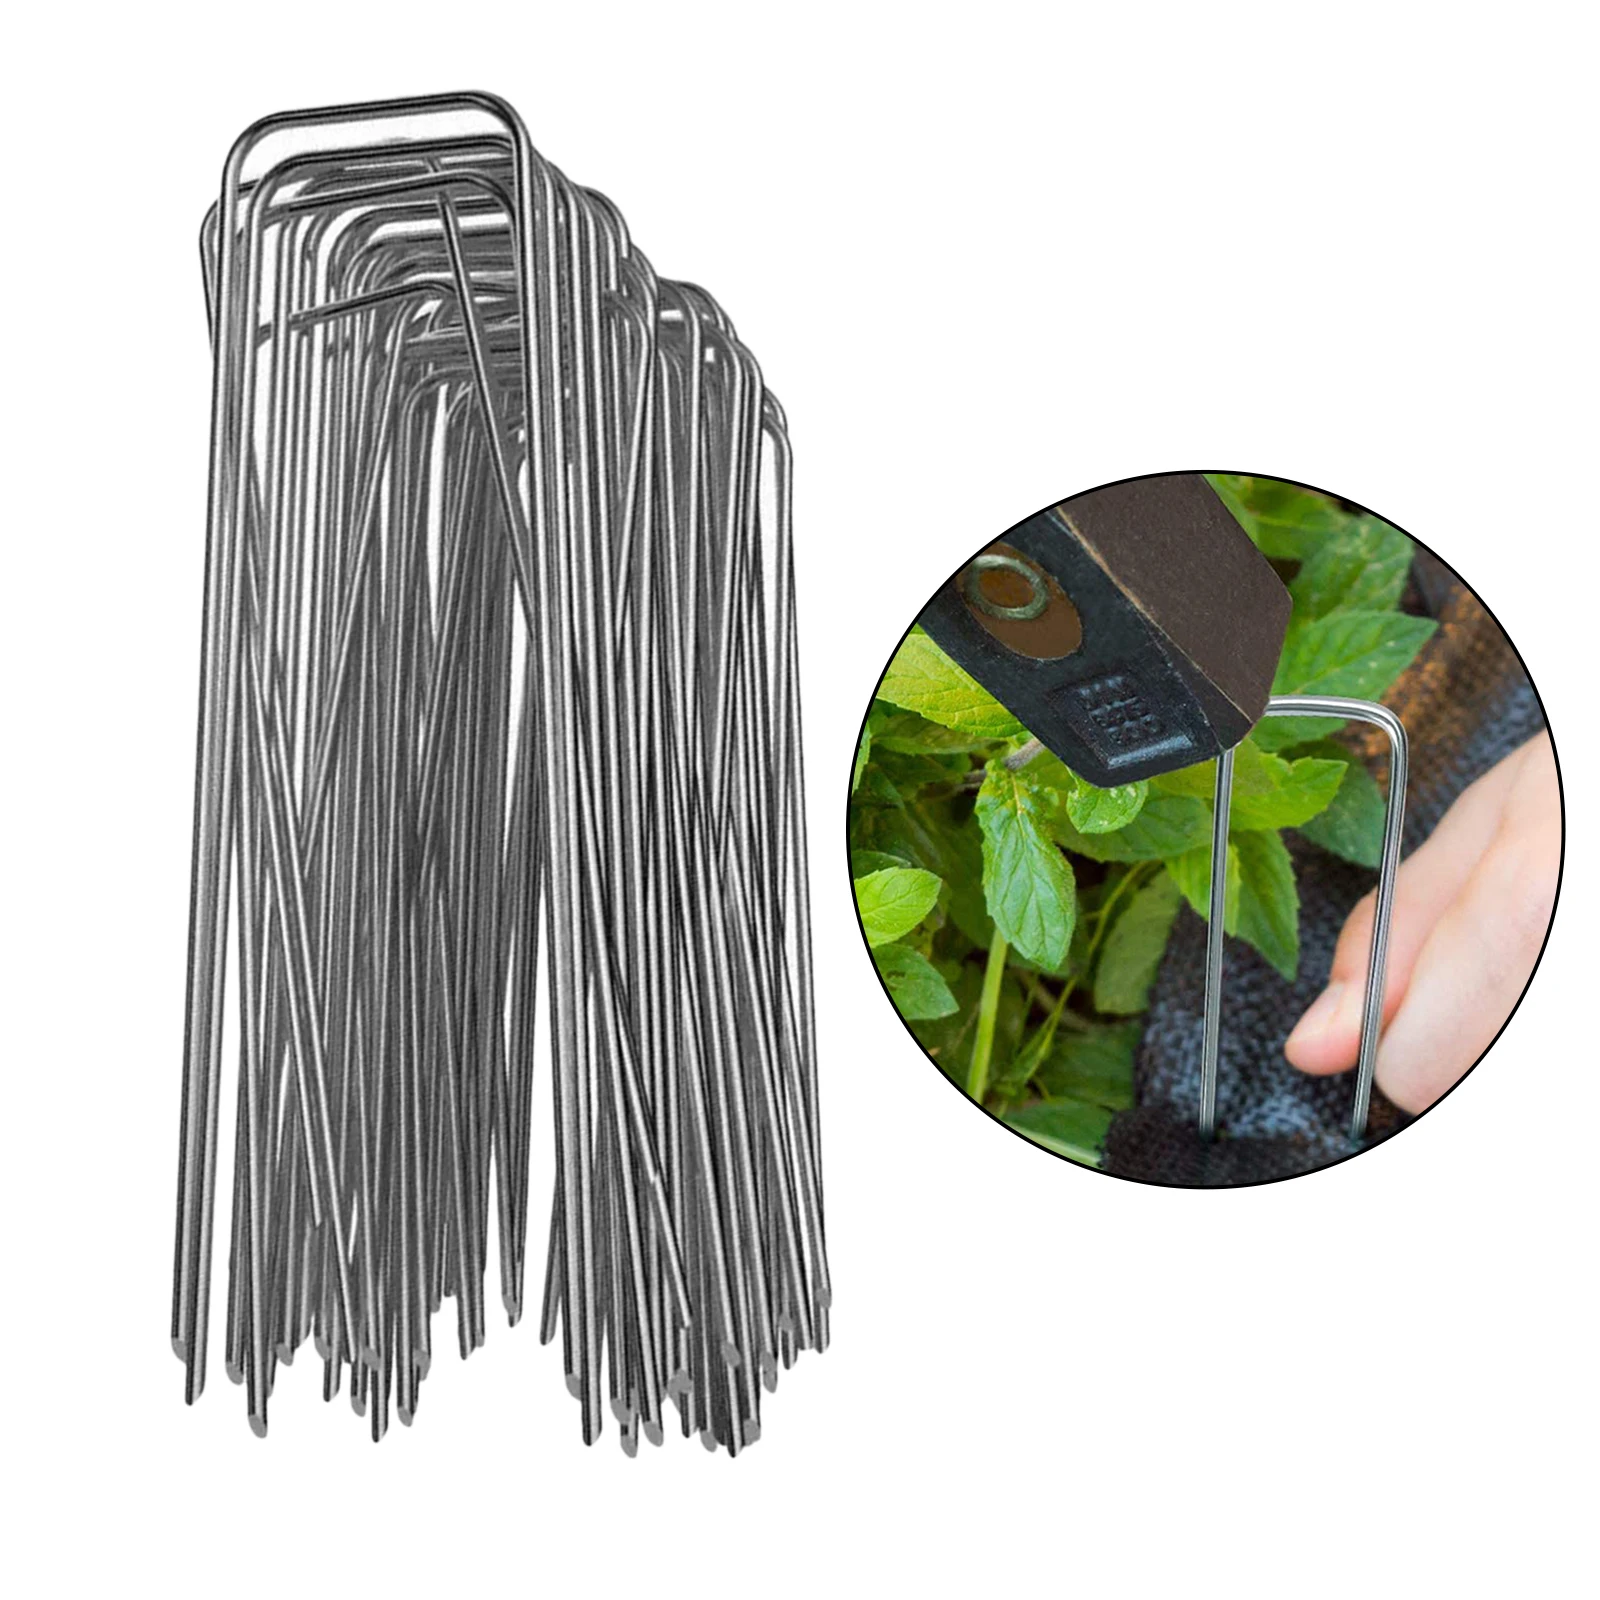 50 pcs U Shape 11 Gauge Galvanized Steel Garden Stakes Staple Securing Pegs For Weed Barrier Landscape Fabric Netting